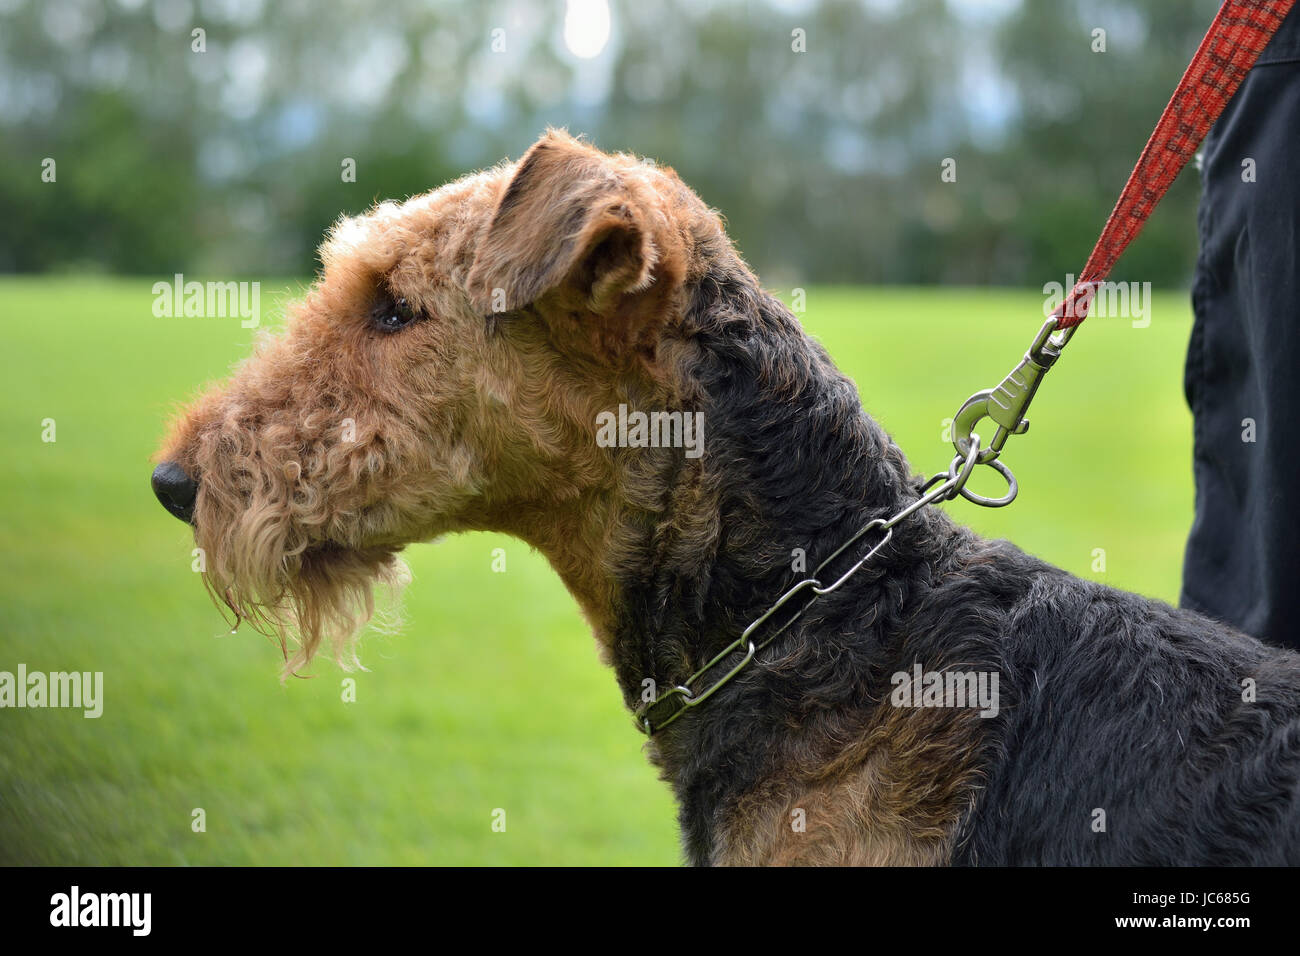 Hund An Der Leine High Resolution Stock Photography and Images - Alamy